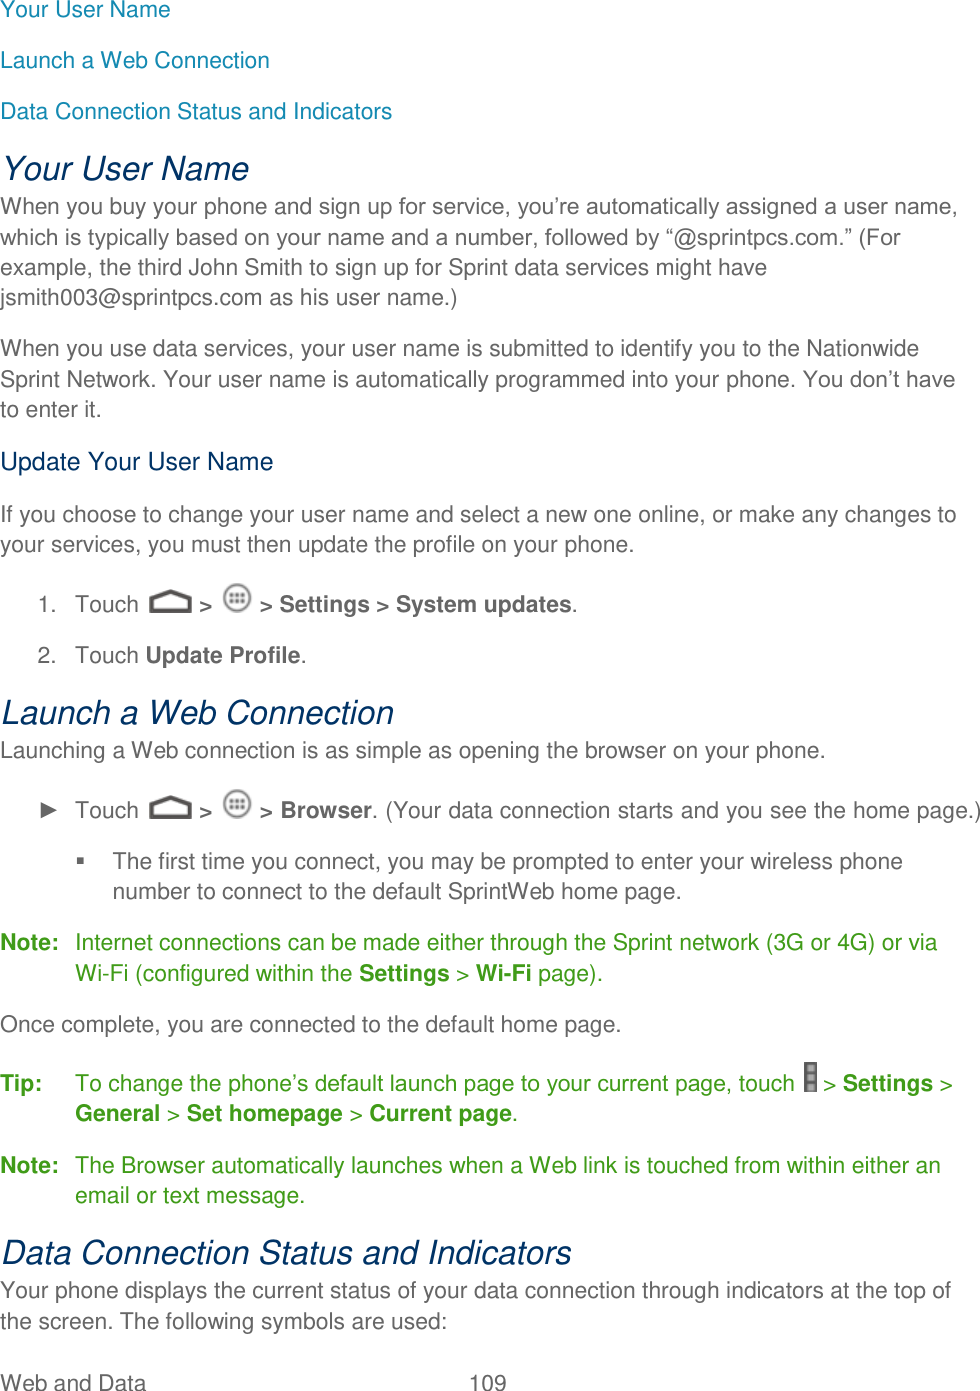 Web and Data  109   Your User Name Launch a Web Connection Data Connection Status and Indicators Your User Name When you buy your phone and sign up for service, you’re automatically assigned a user name, which is typically based on your name and a number, followed by “@sprintpcs.com.” (For example, the third John Smith to sign up for Sprint data services might have jsmith003@sprintpcs.com as his user name.) When you use data services, your user name is submitted to identify you to the Nationwide Sprint Network. Your user name is automatically programmed into your phone. You don’t have to enter it. Update Your User Name If you choose to change your user name and select a new one online, or make any changes to your services, you must then update the profile on your phone. 1.  Touch   &gt;   &gt; Settings &gt; System updates.  2.  Touch Update Profile. Launch a Web Connection  Launching a Web connection is as simple as opening the browser on your phone. ►  Touch   &gt;   &gt; Browser. (Your data connection starts and you see the home page.)   The first time you connect, you may be prompted to enter your wireless phone number to connect to the default SprintWeb home page. Note:  Internet connections can be made either through the Sprint network (3G or 4G) or via Wi-Fi (configured within the Settings &gt; Wi-Fi page). Once complete, you are connected to the default home page.   Tip:  To change the phone’s default launch page to your current page, touch   &gt; Settings &gt; General &gt; Set homepage &gt; Current page. Note:  The Browser automatically launches when a Web link is touched from within either an email or text message. Data Connection Status and Indicators Your phone displays the current status of your data connection through indicators at the top of the screen. The following symbols are used: 